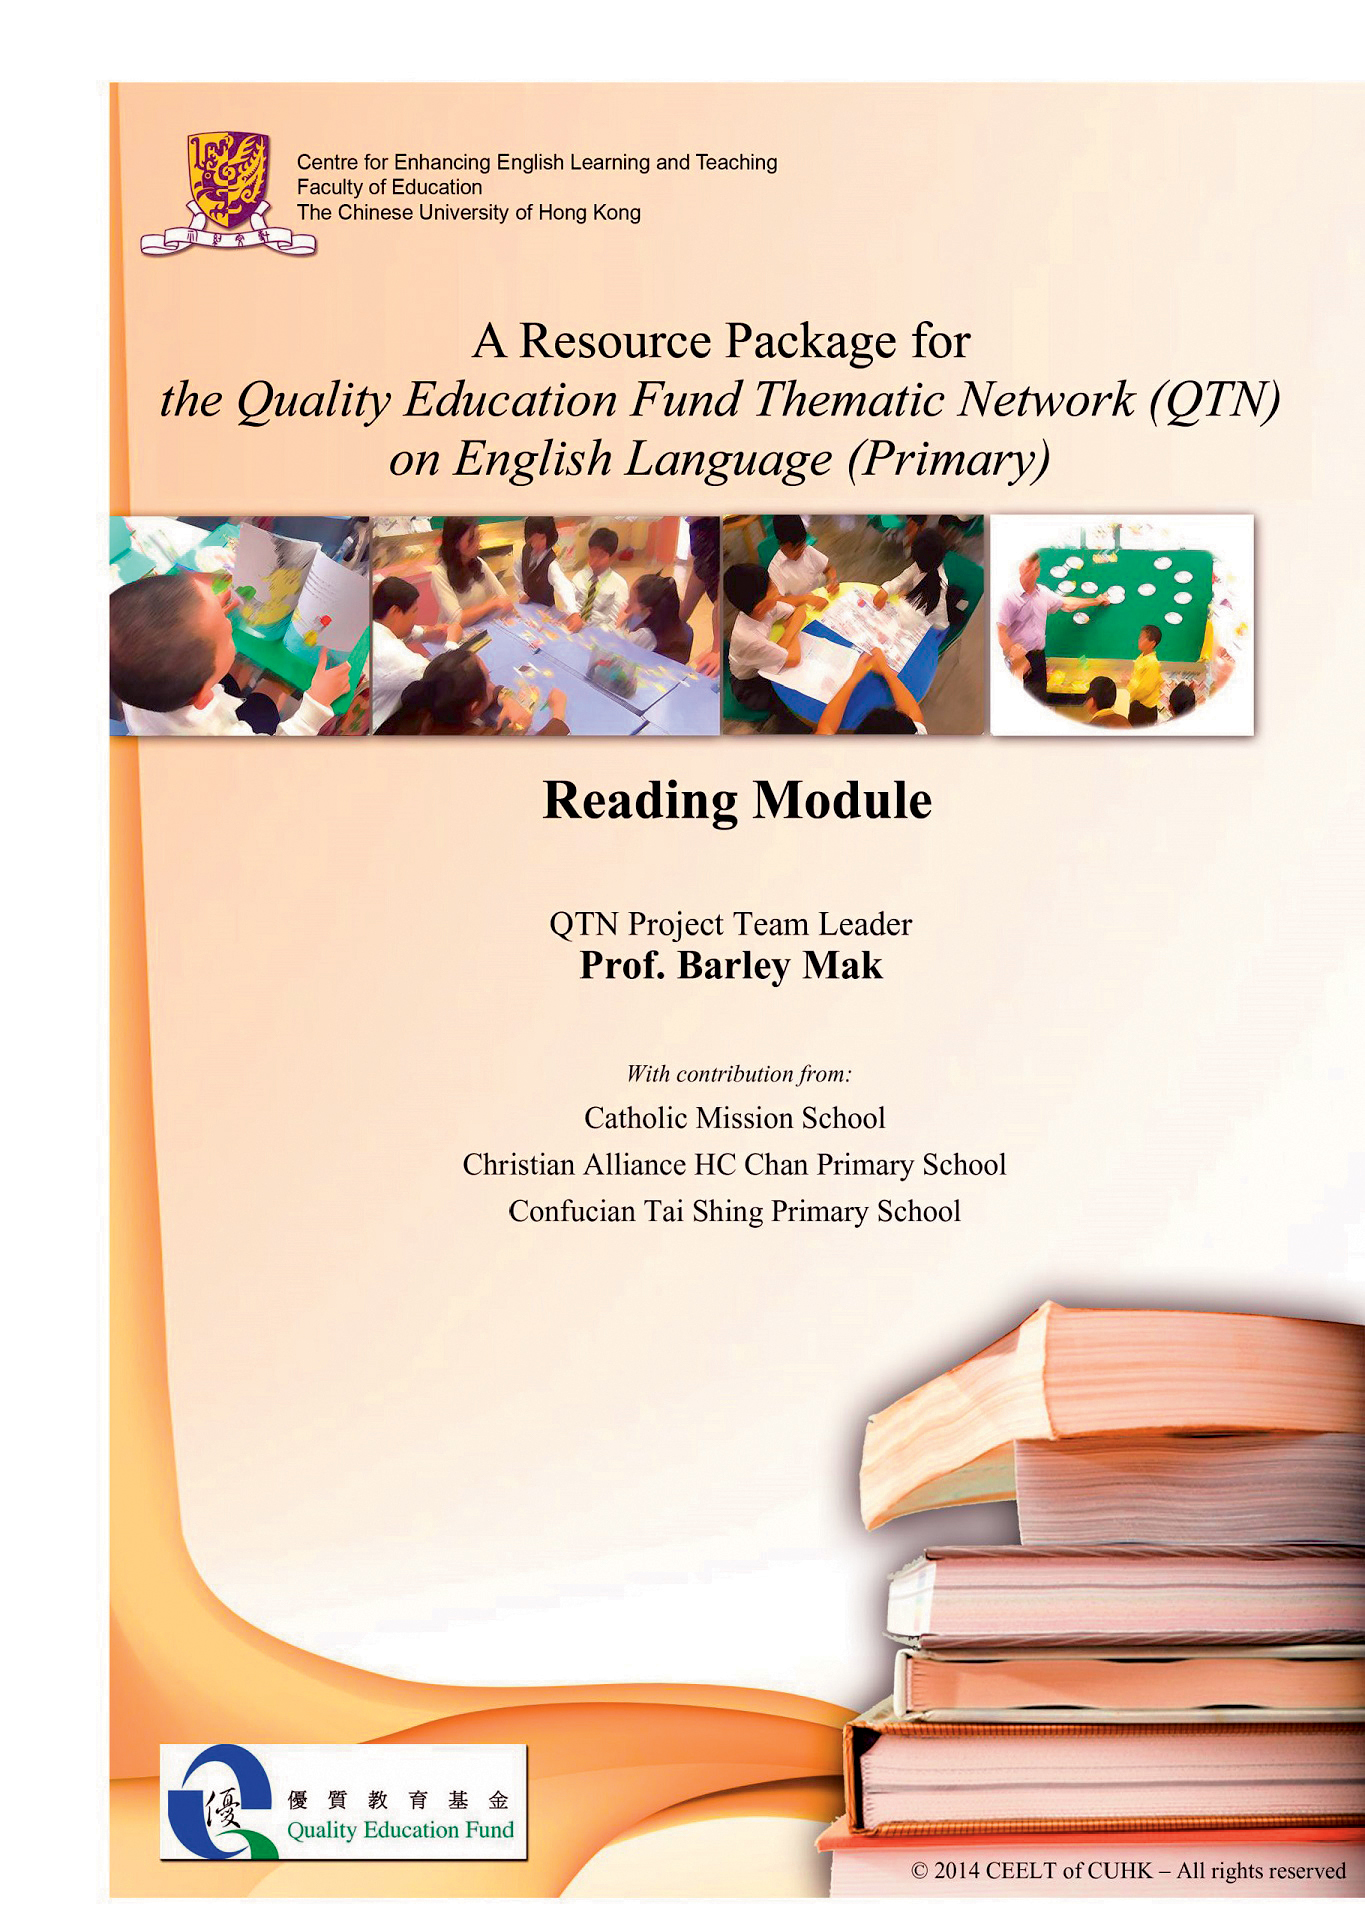 A Resource Package for Quality Education Fund 
Thematic Network (QTN) on English Language (Primary): 
Reading Module